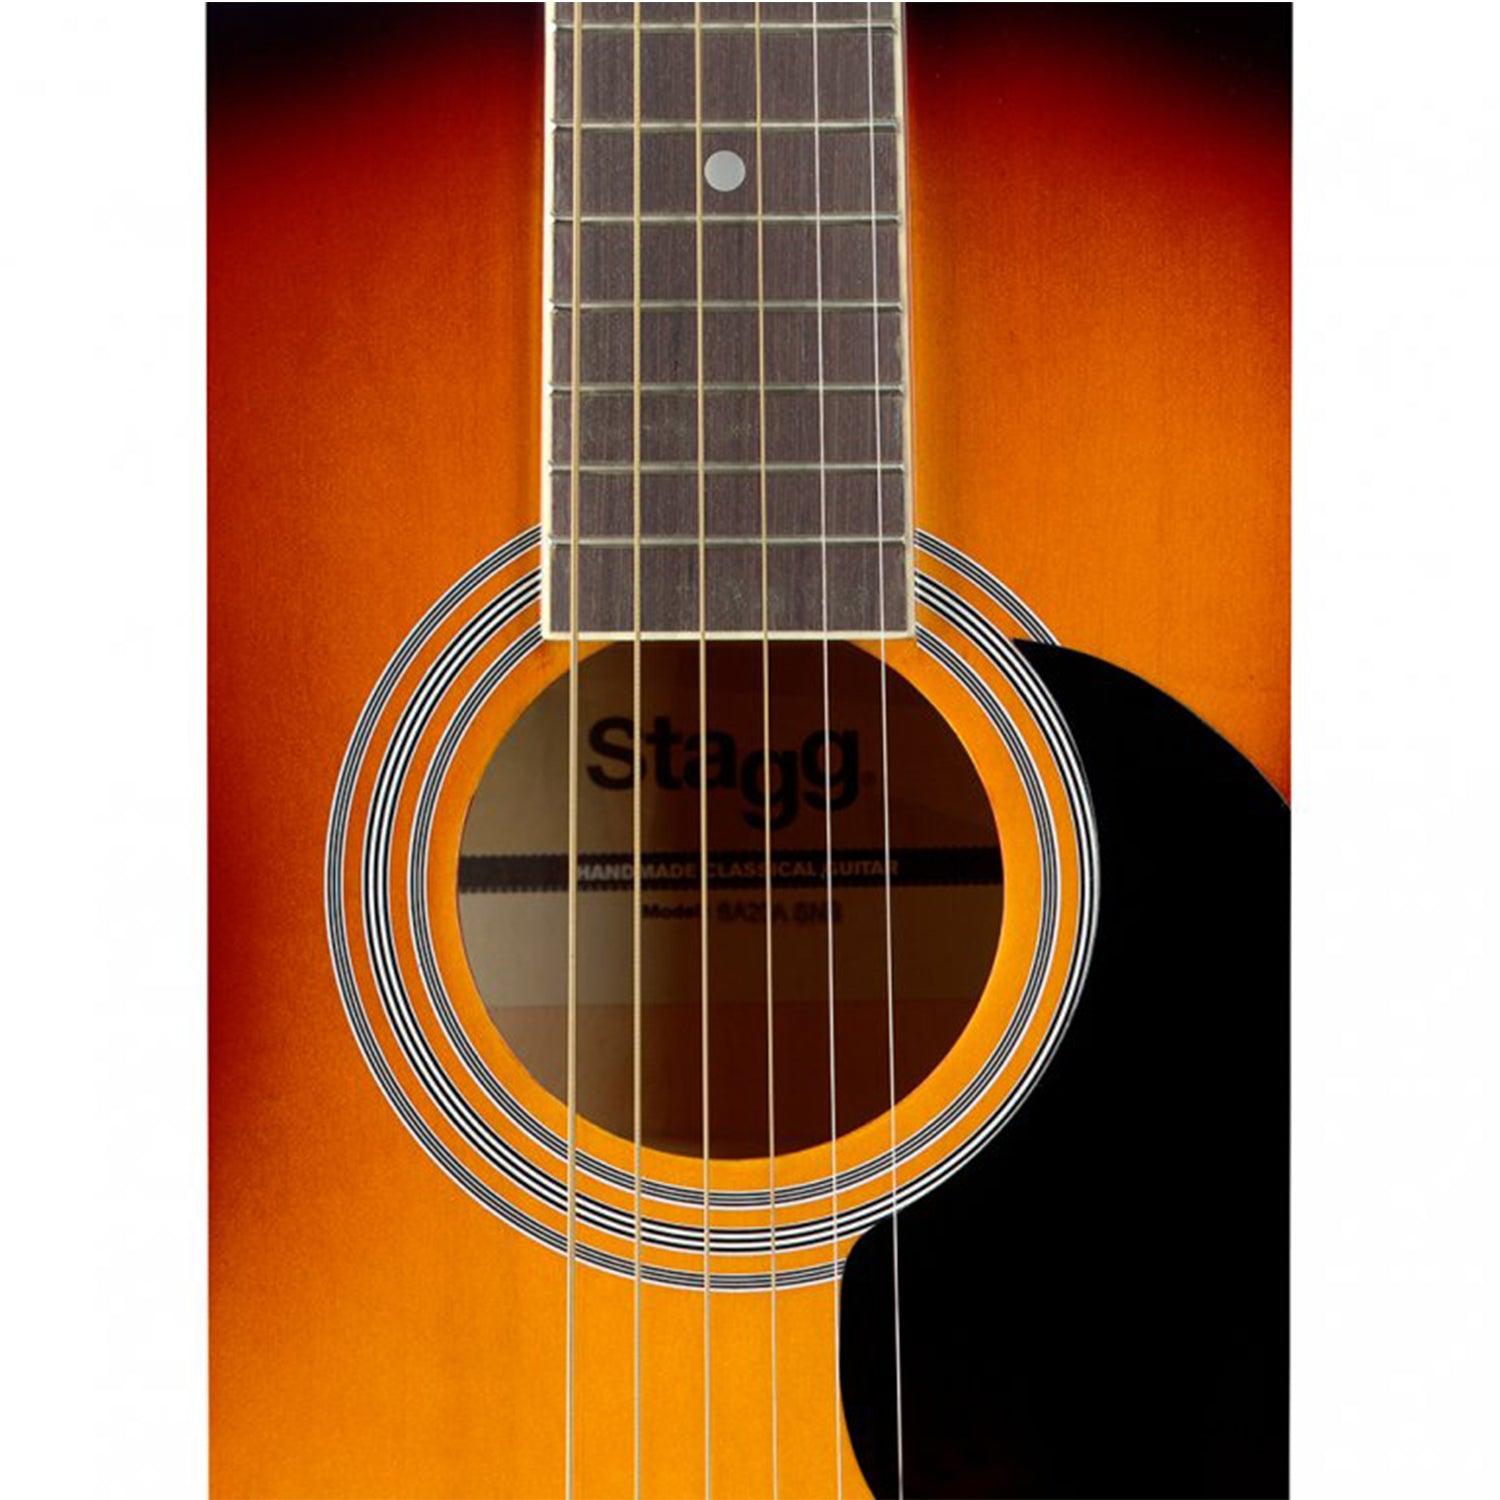 Stagg SA20A SNB 4/4 Sunburst Auditorium Acoustic Guitar with Basswood Top - DY Pro Audio